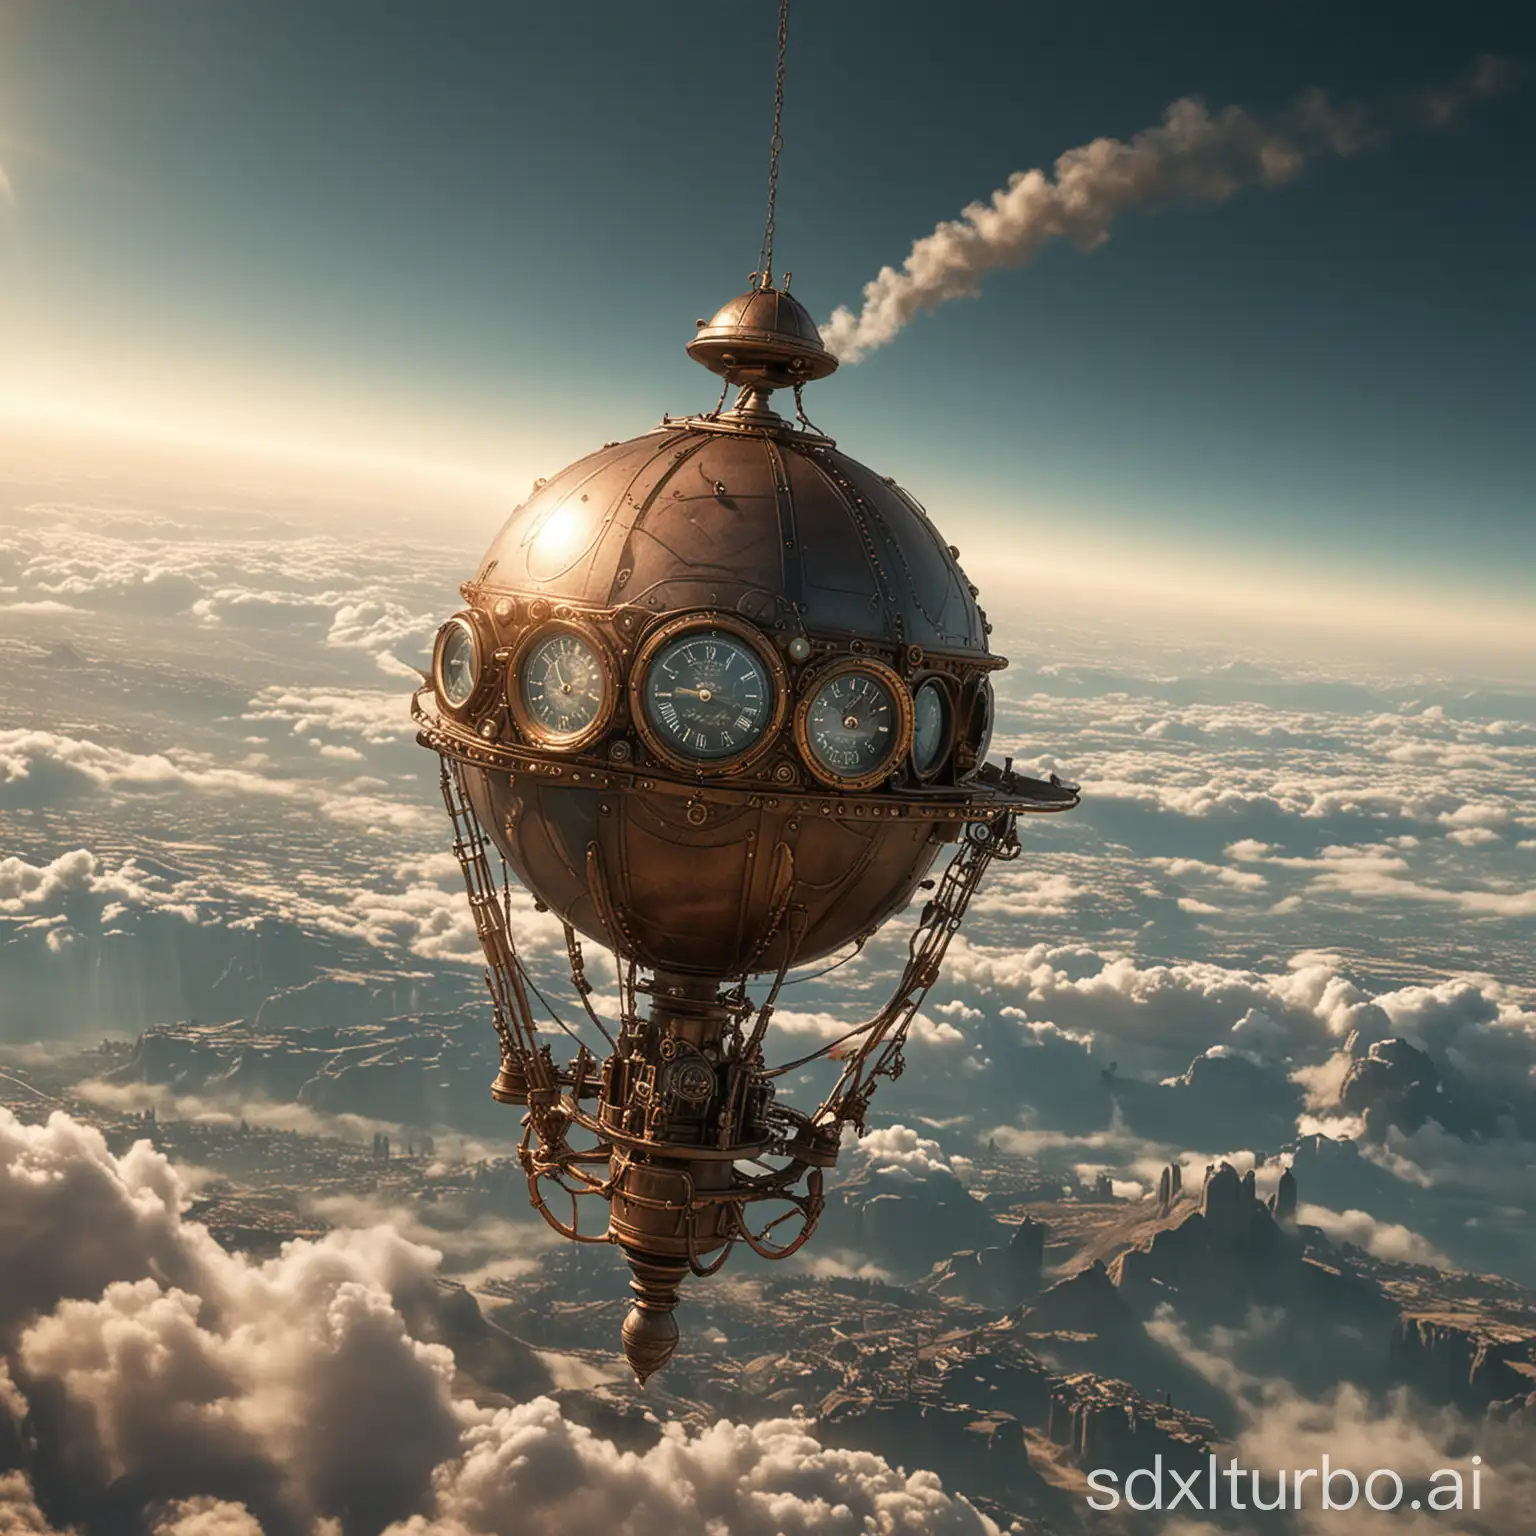 1910 steam punk Time Machine orb flying above the earth.